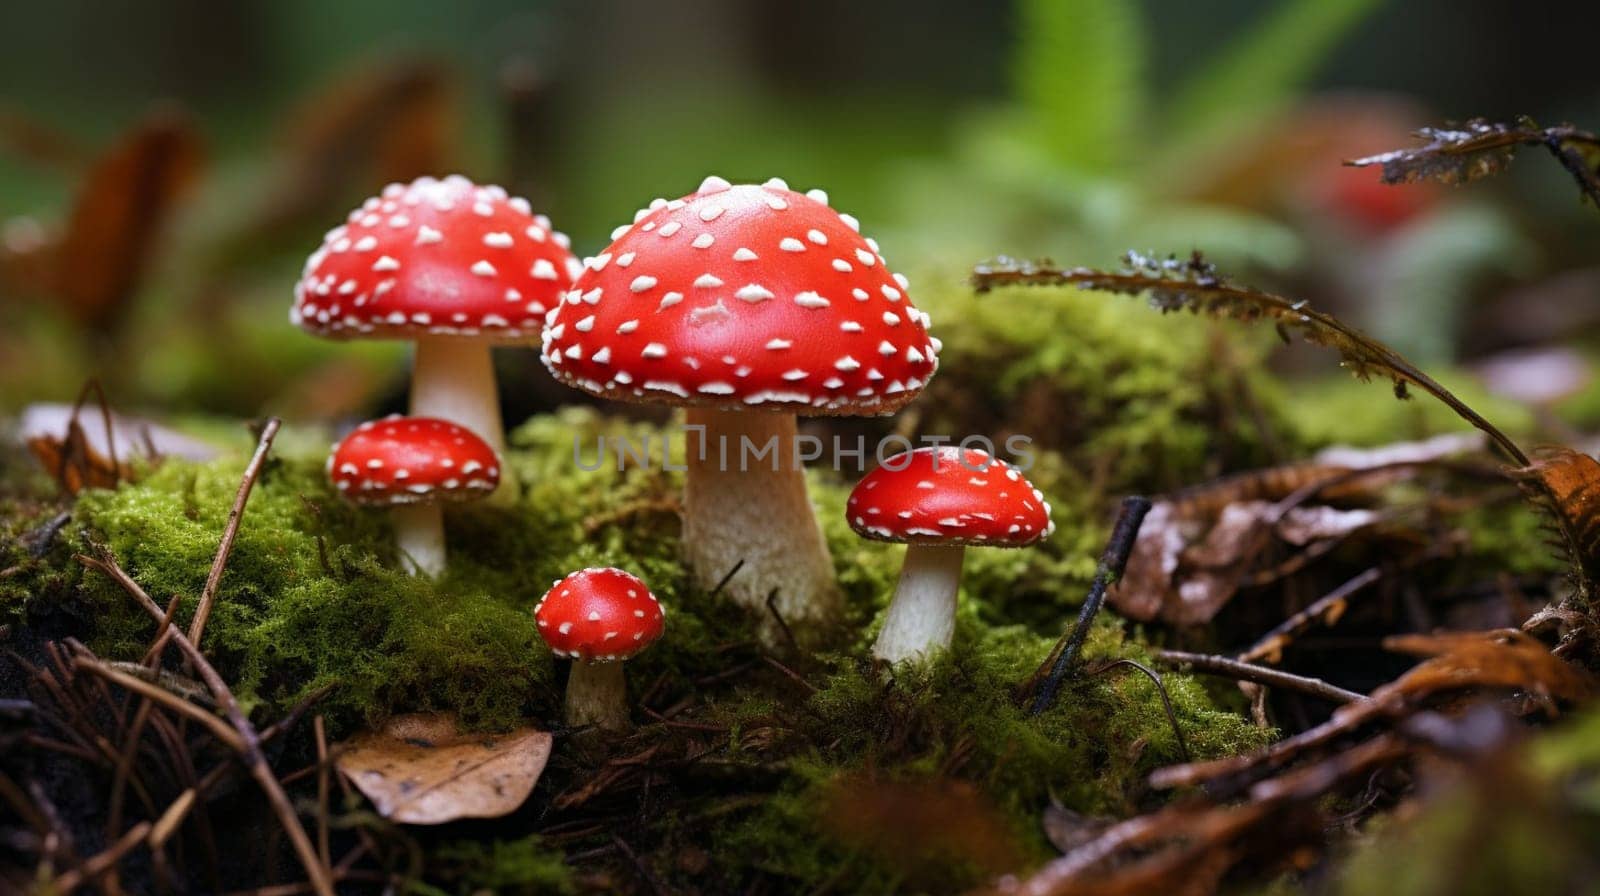 A cluster of red mushrooms thrives in the lush moss of the natural environment, surrounded by terrestrial plants and leaves, in a beautiful natural landscape